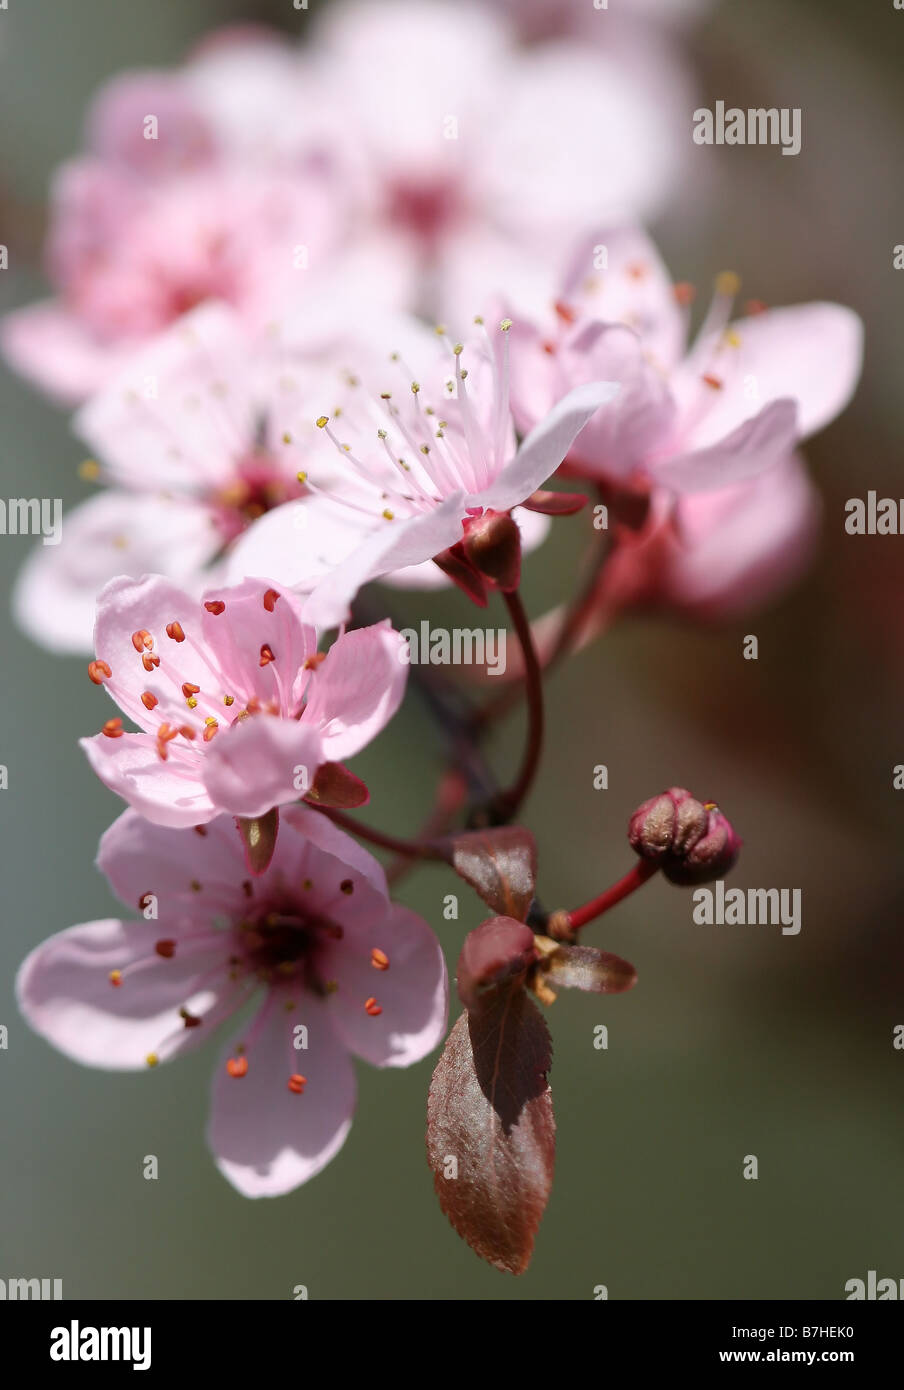 Wild cherry blossom, a welcome sign of Spring Stock Photo